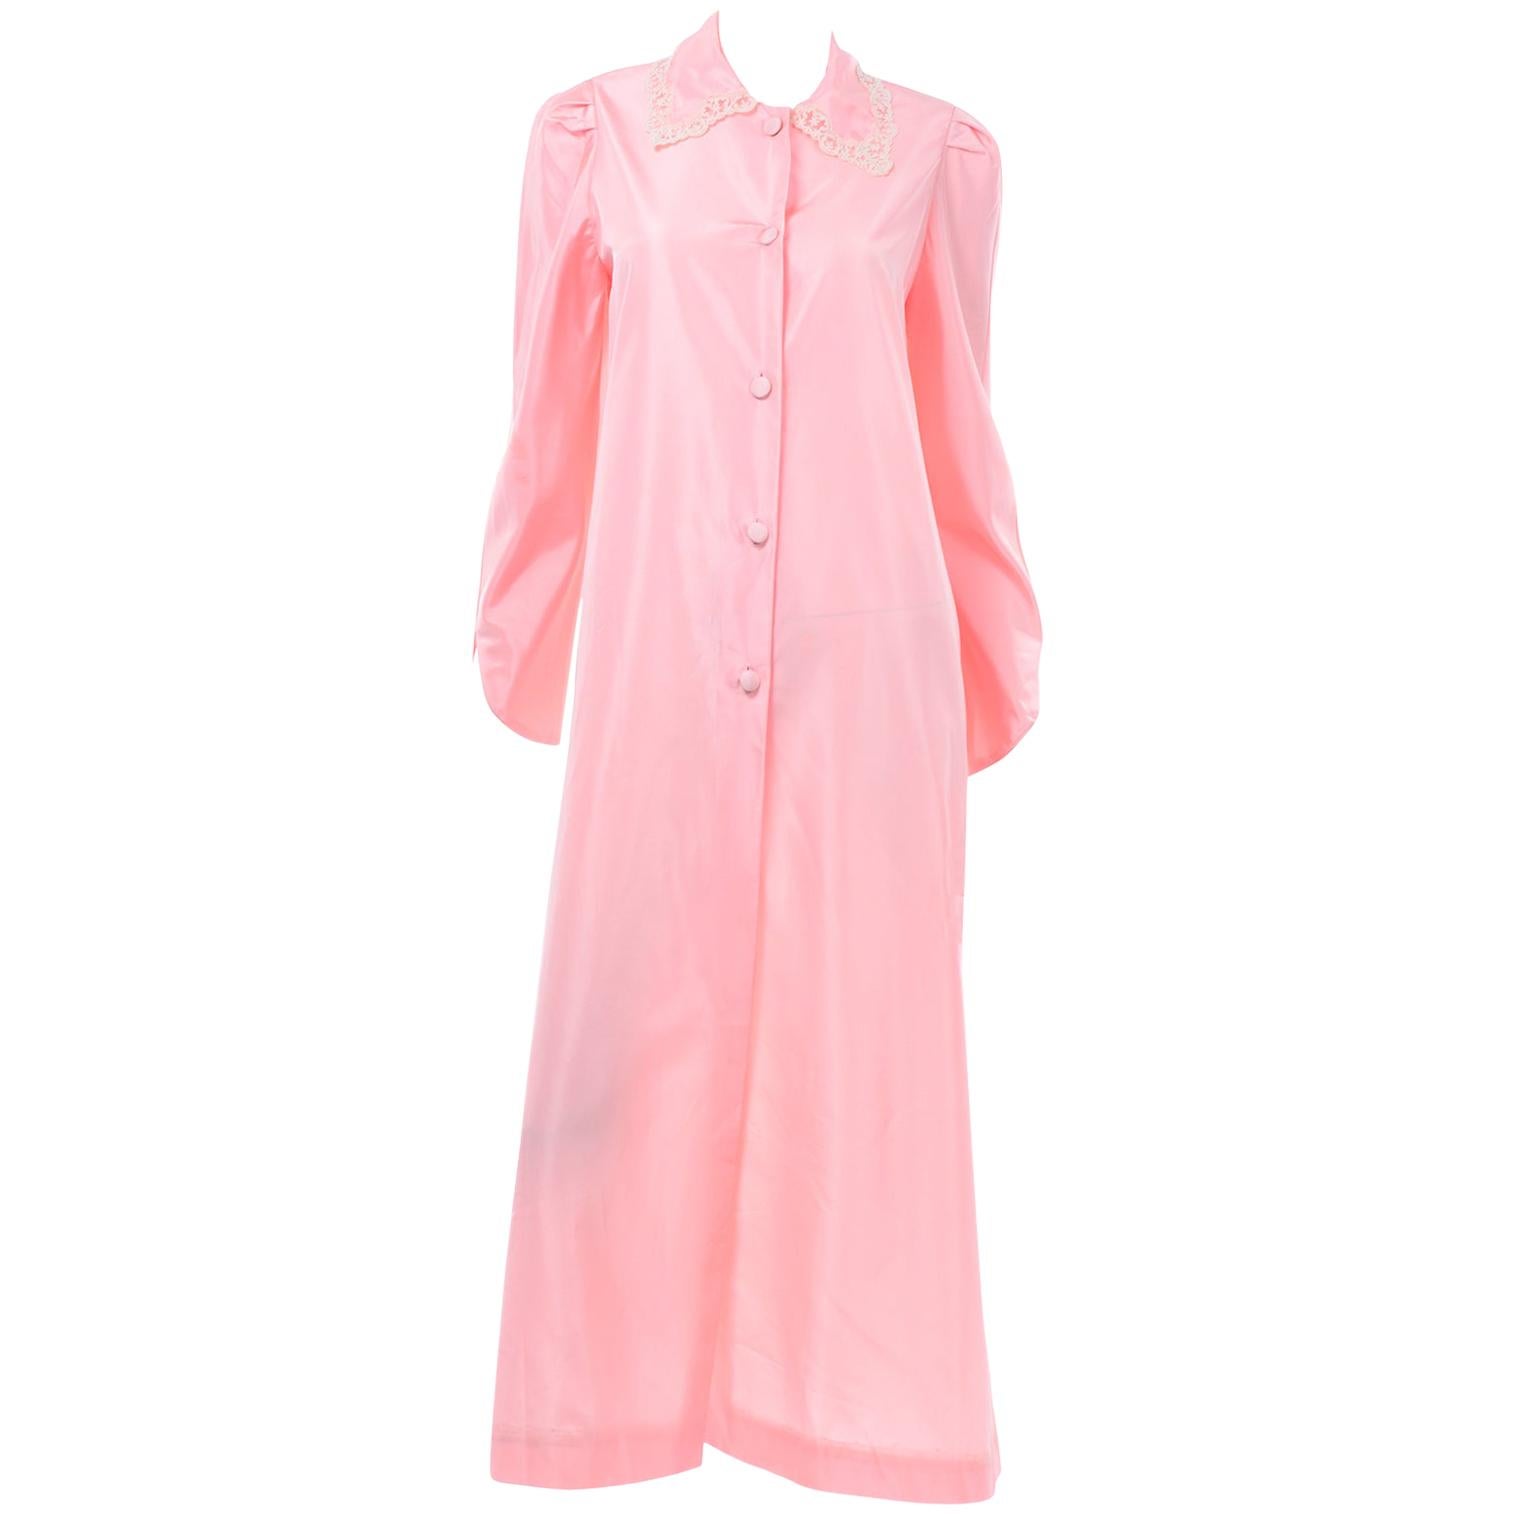 Chloe Vintage Button Front Pink Taffeta Robe With Lace Trim